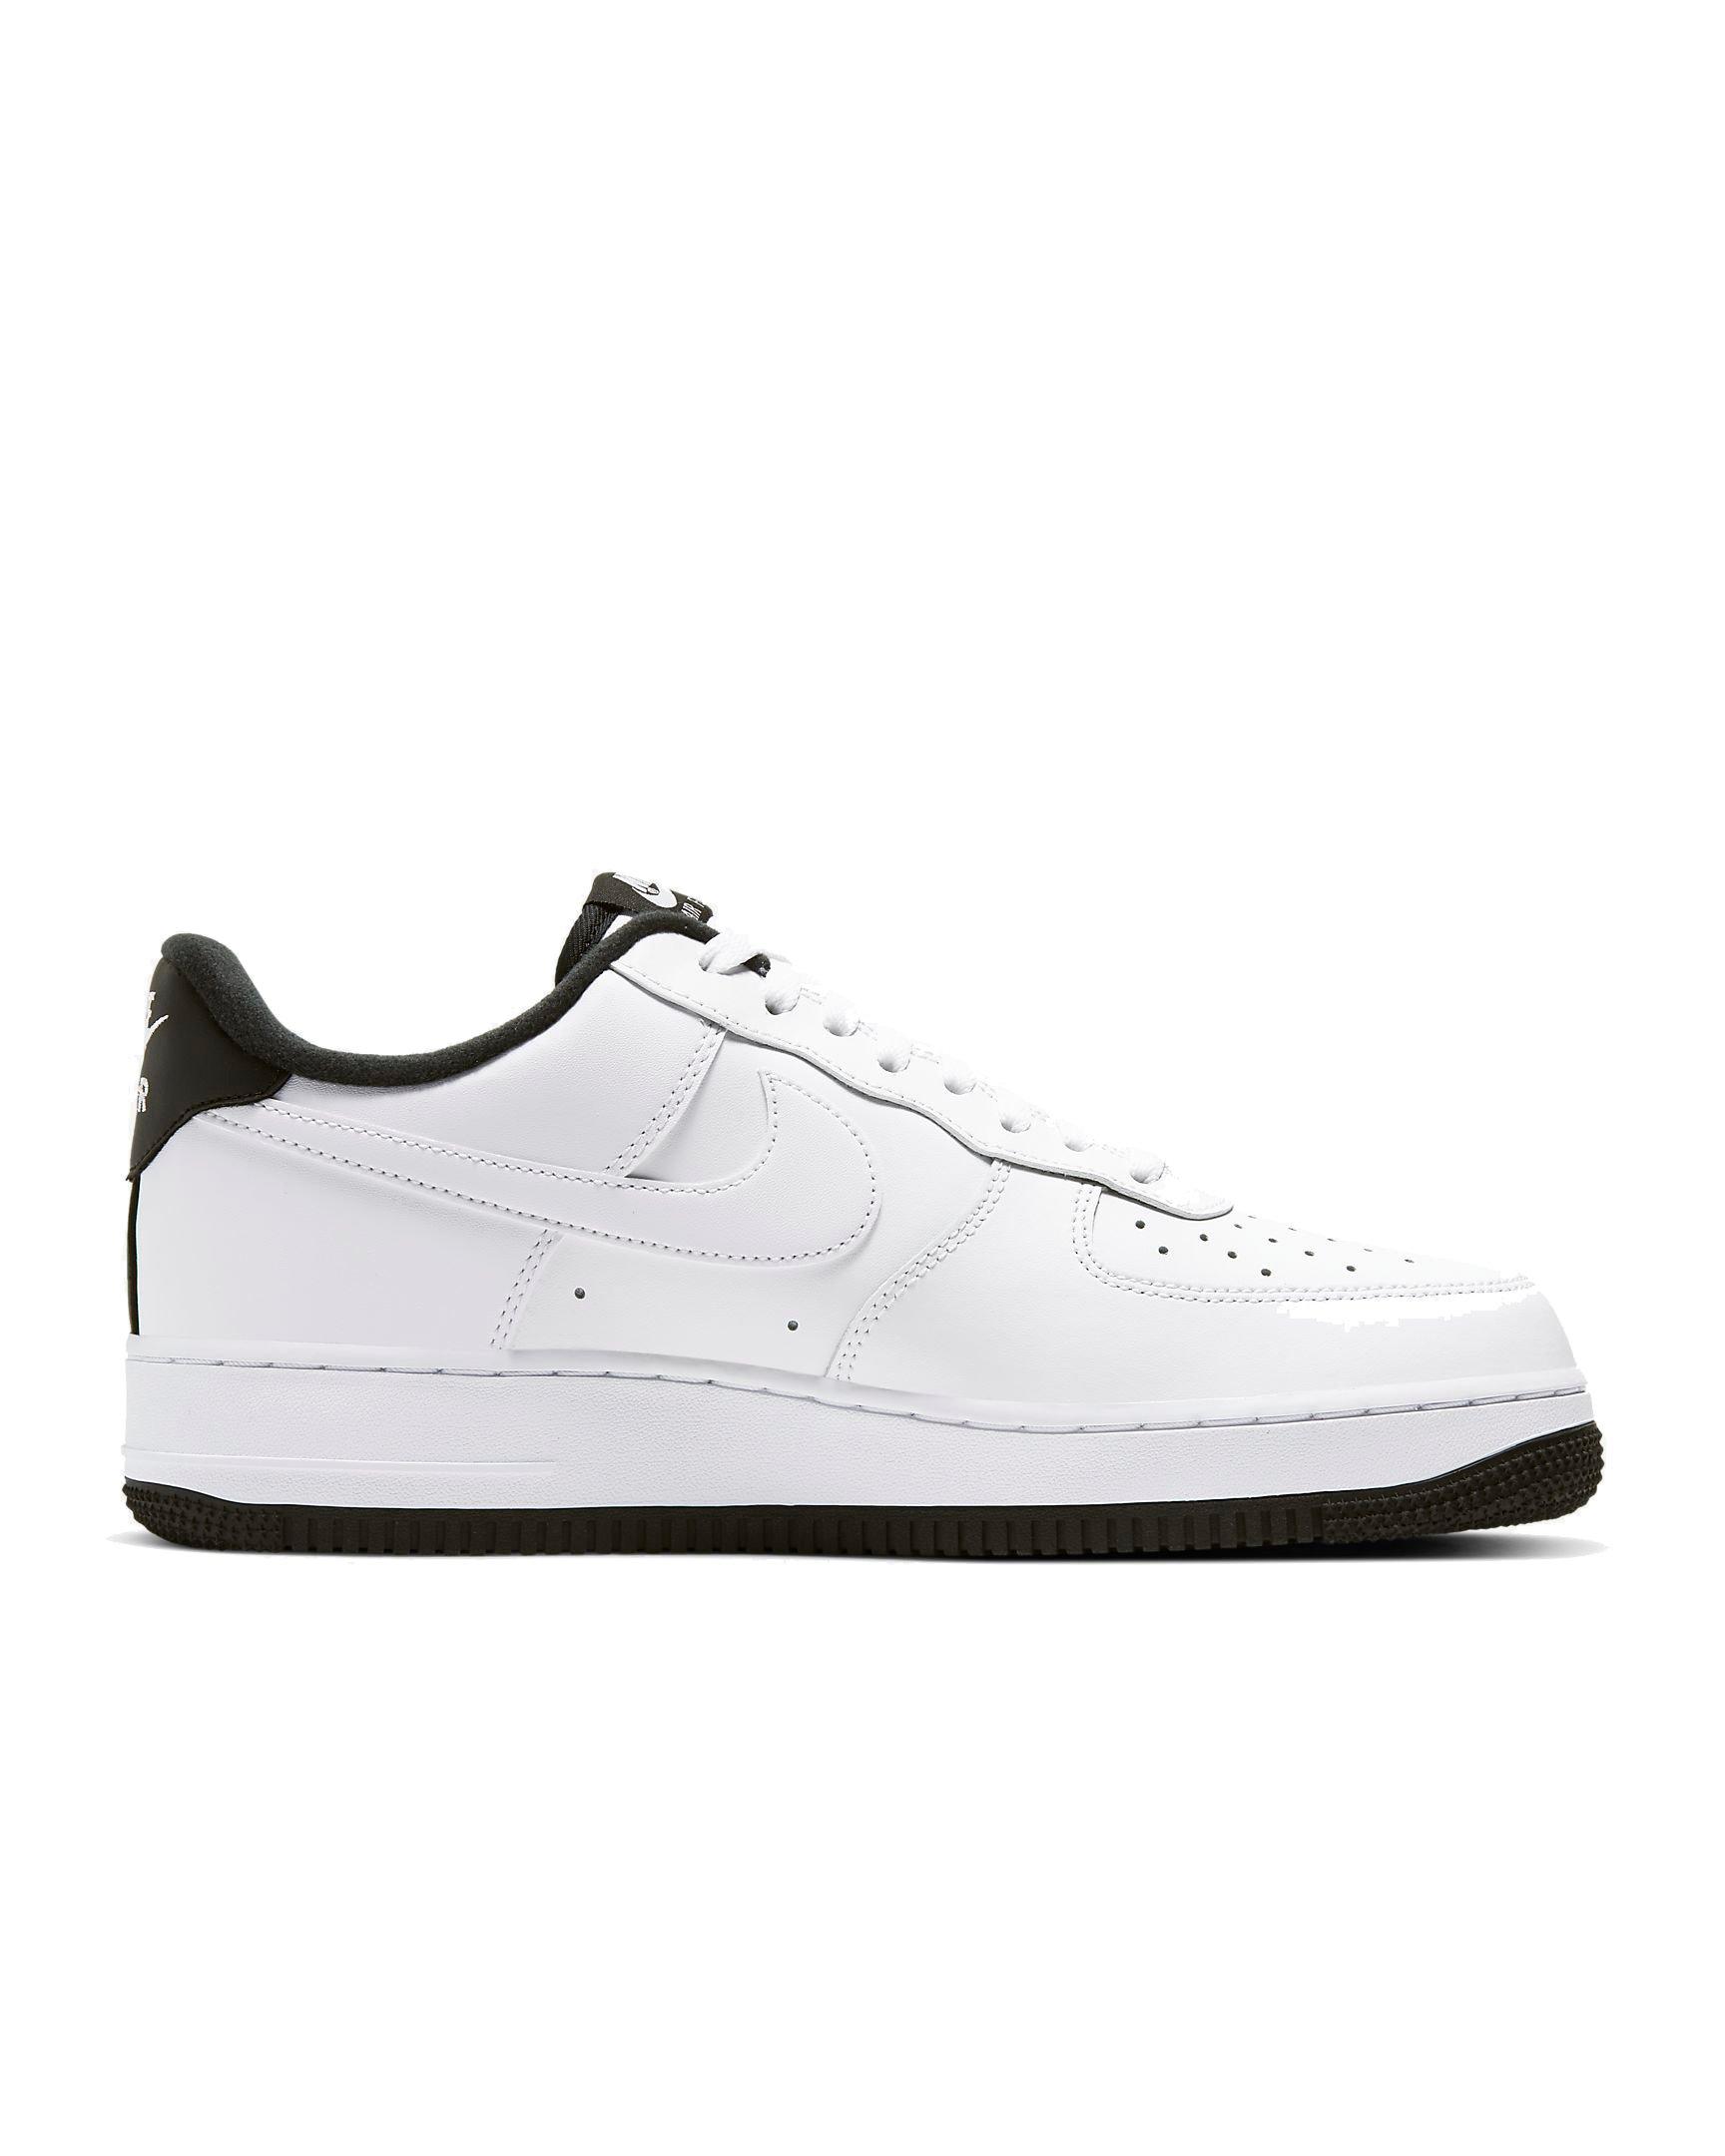 white air force ones with black bottom